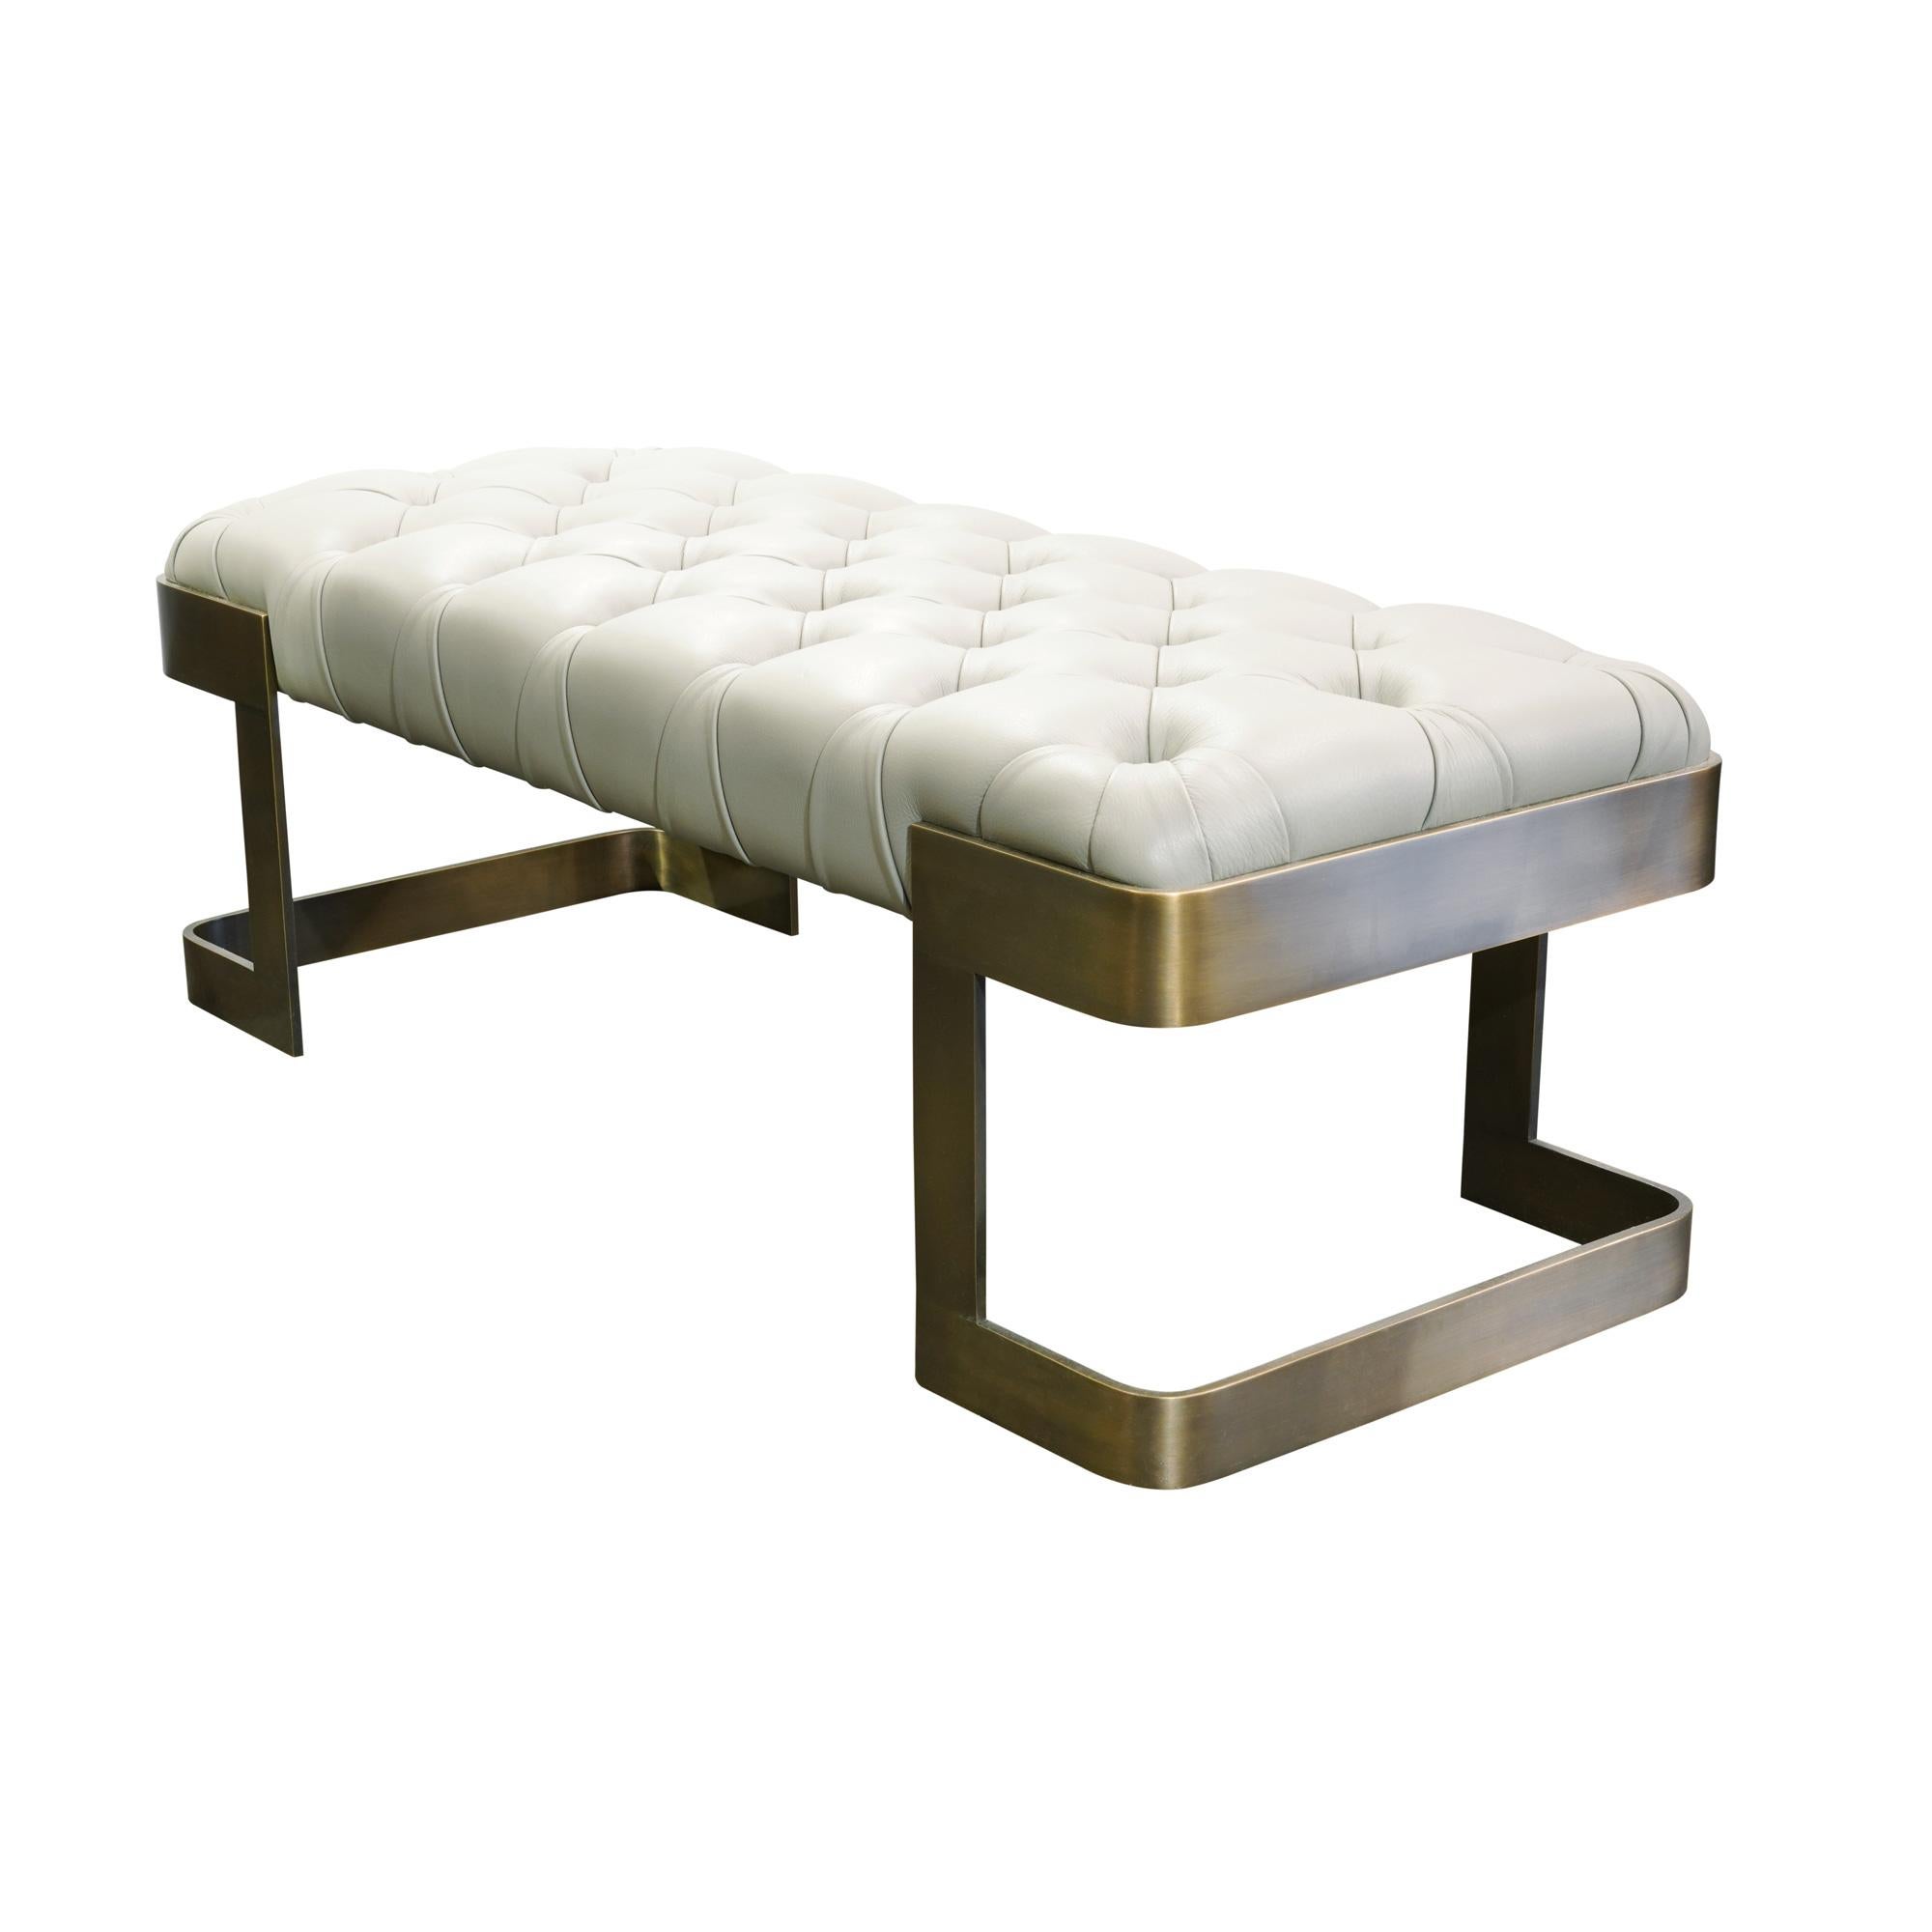 Tufted Leather Bench with Solid Bronze Legs In New Condition For Sale In Westport, CT